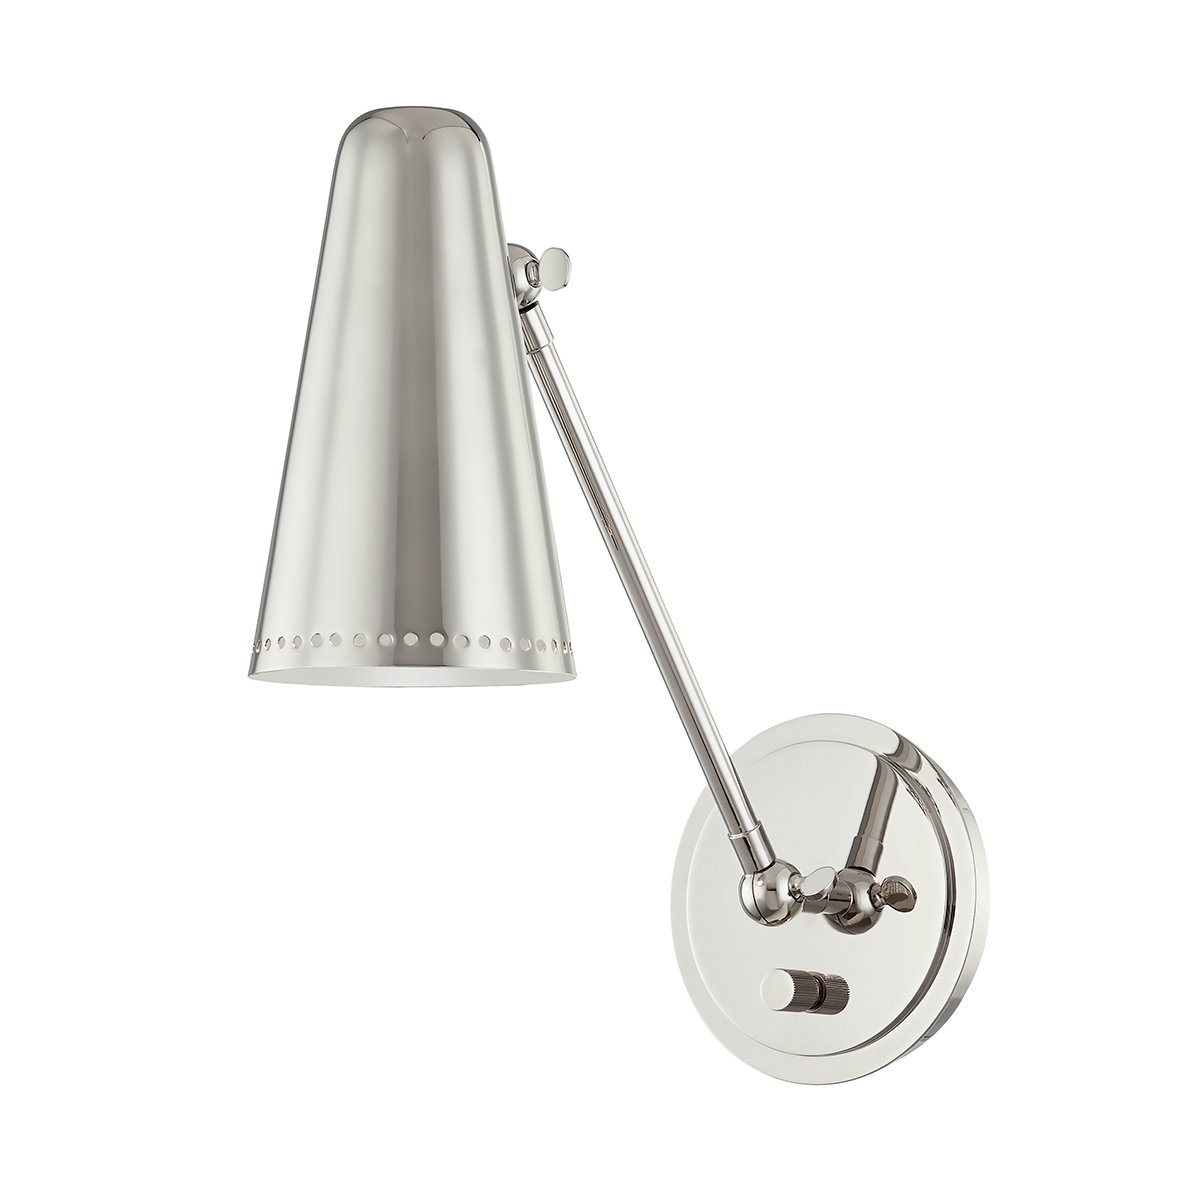 Easley 1 Light Wall Sconce